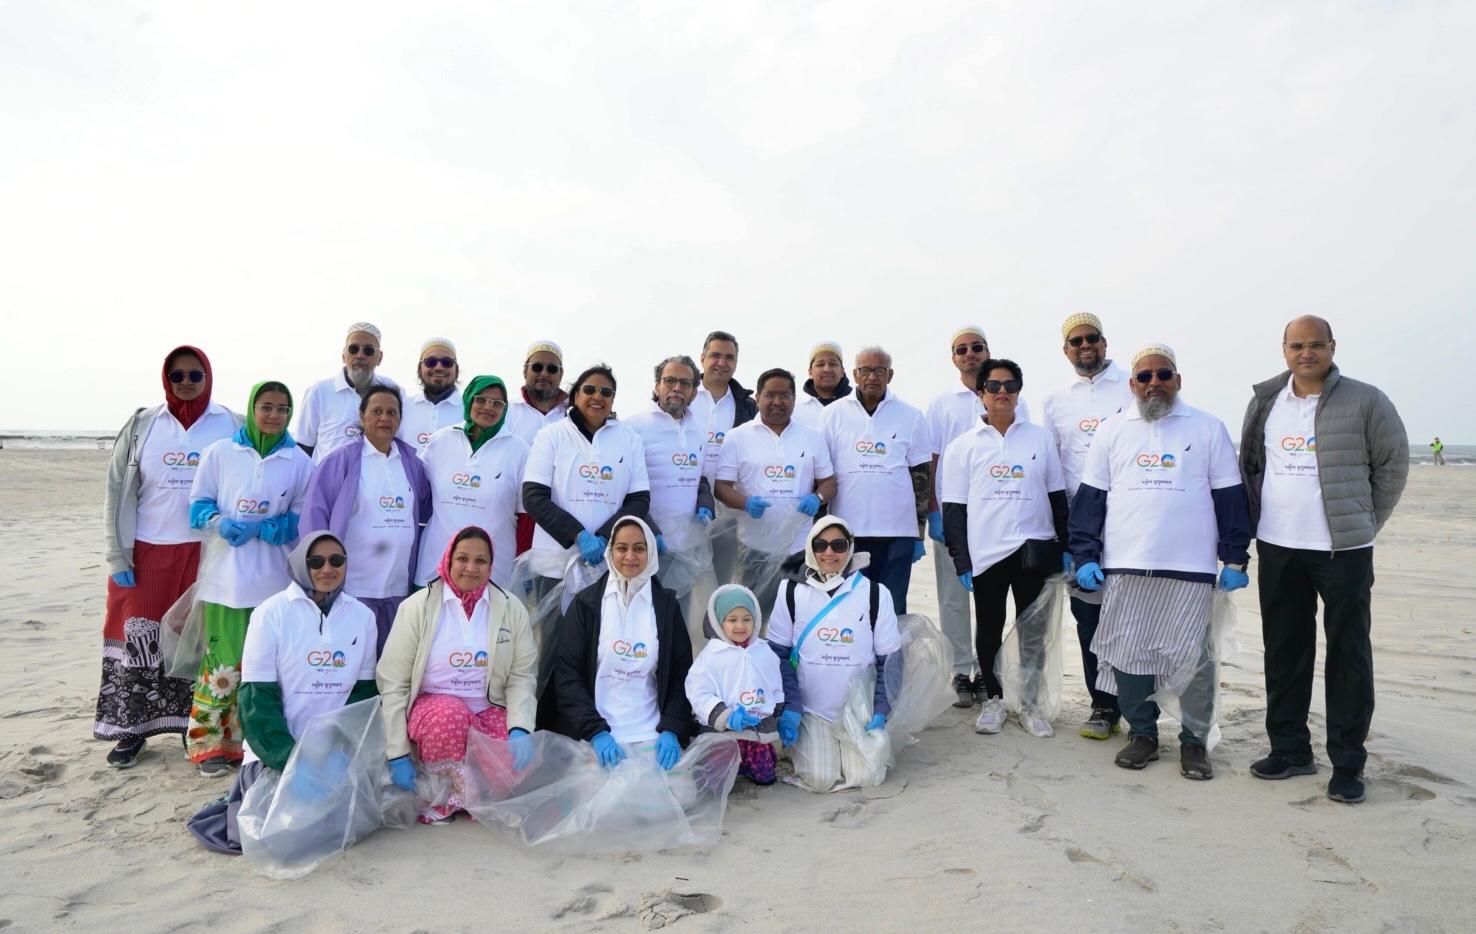 Indian Consulate in New York joins beach clean-up event